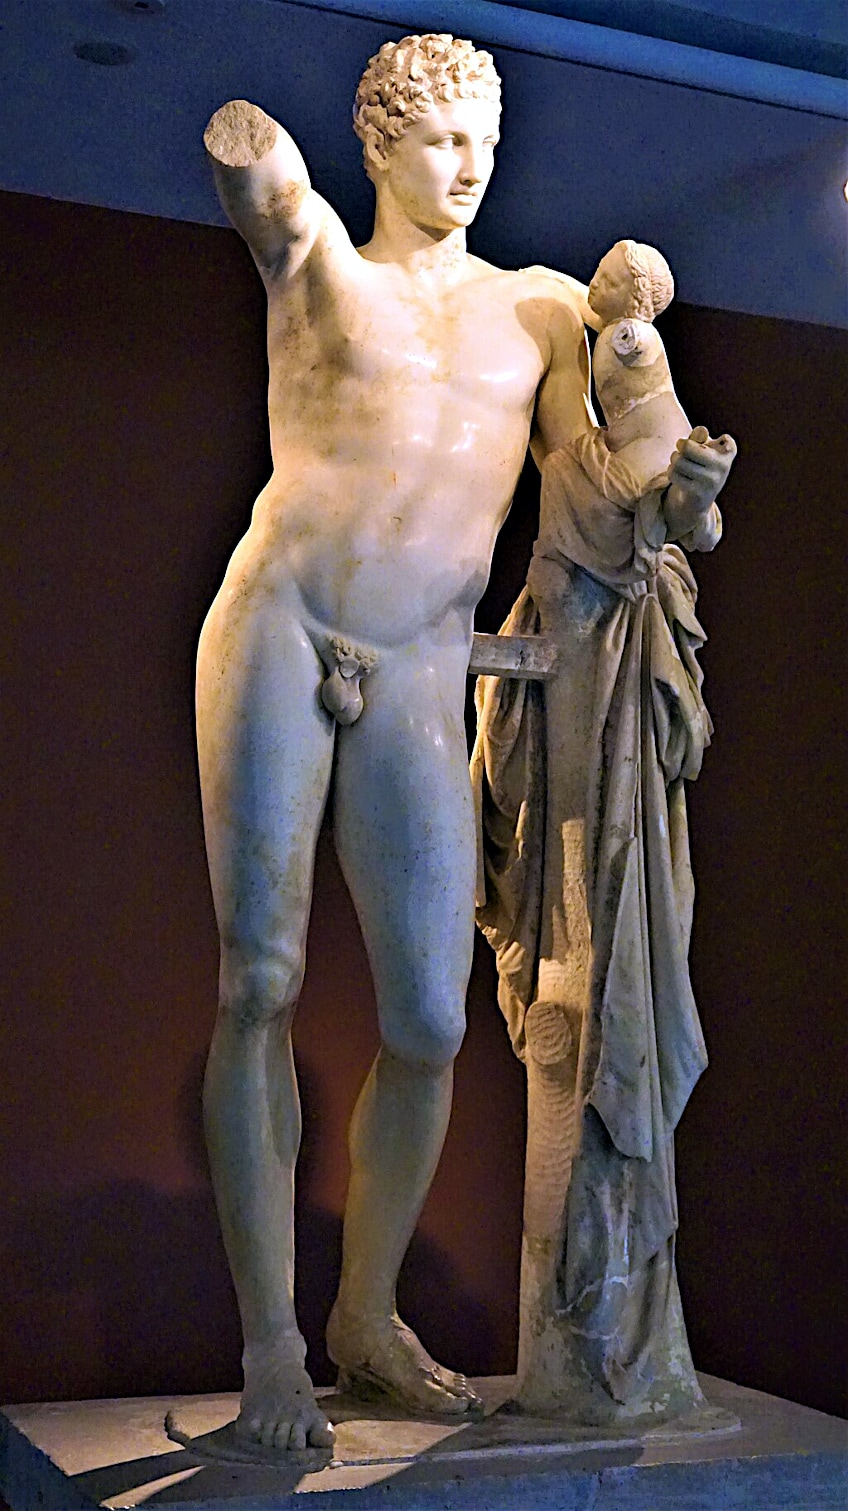 Myths of Hermes and Dionysos